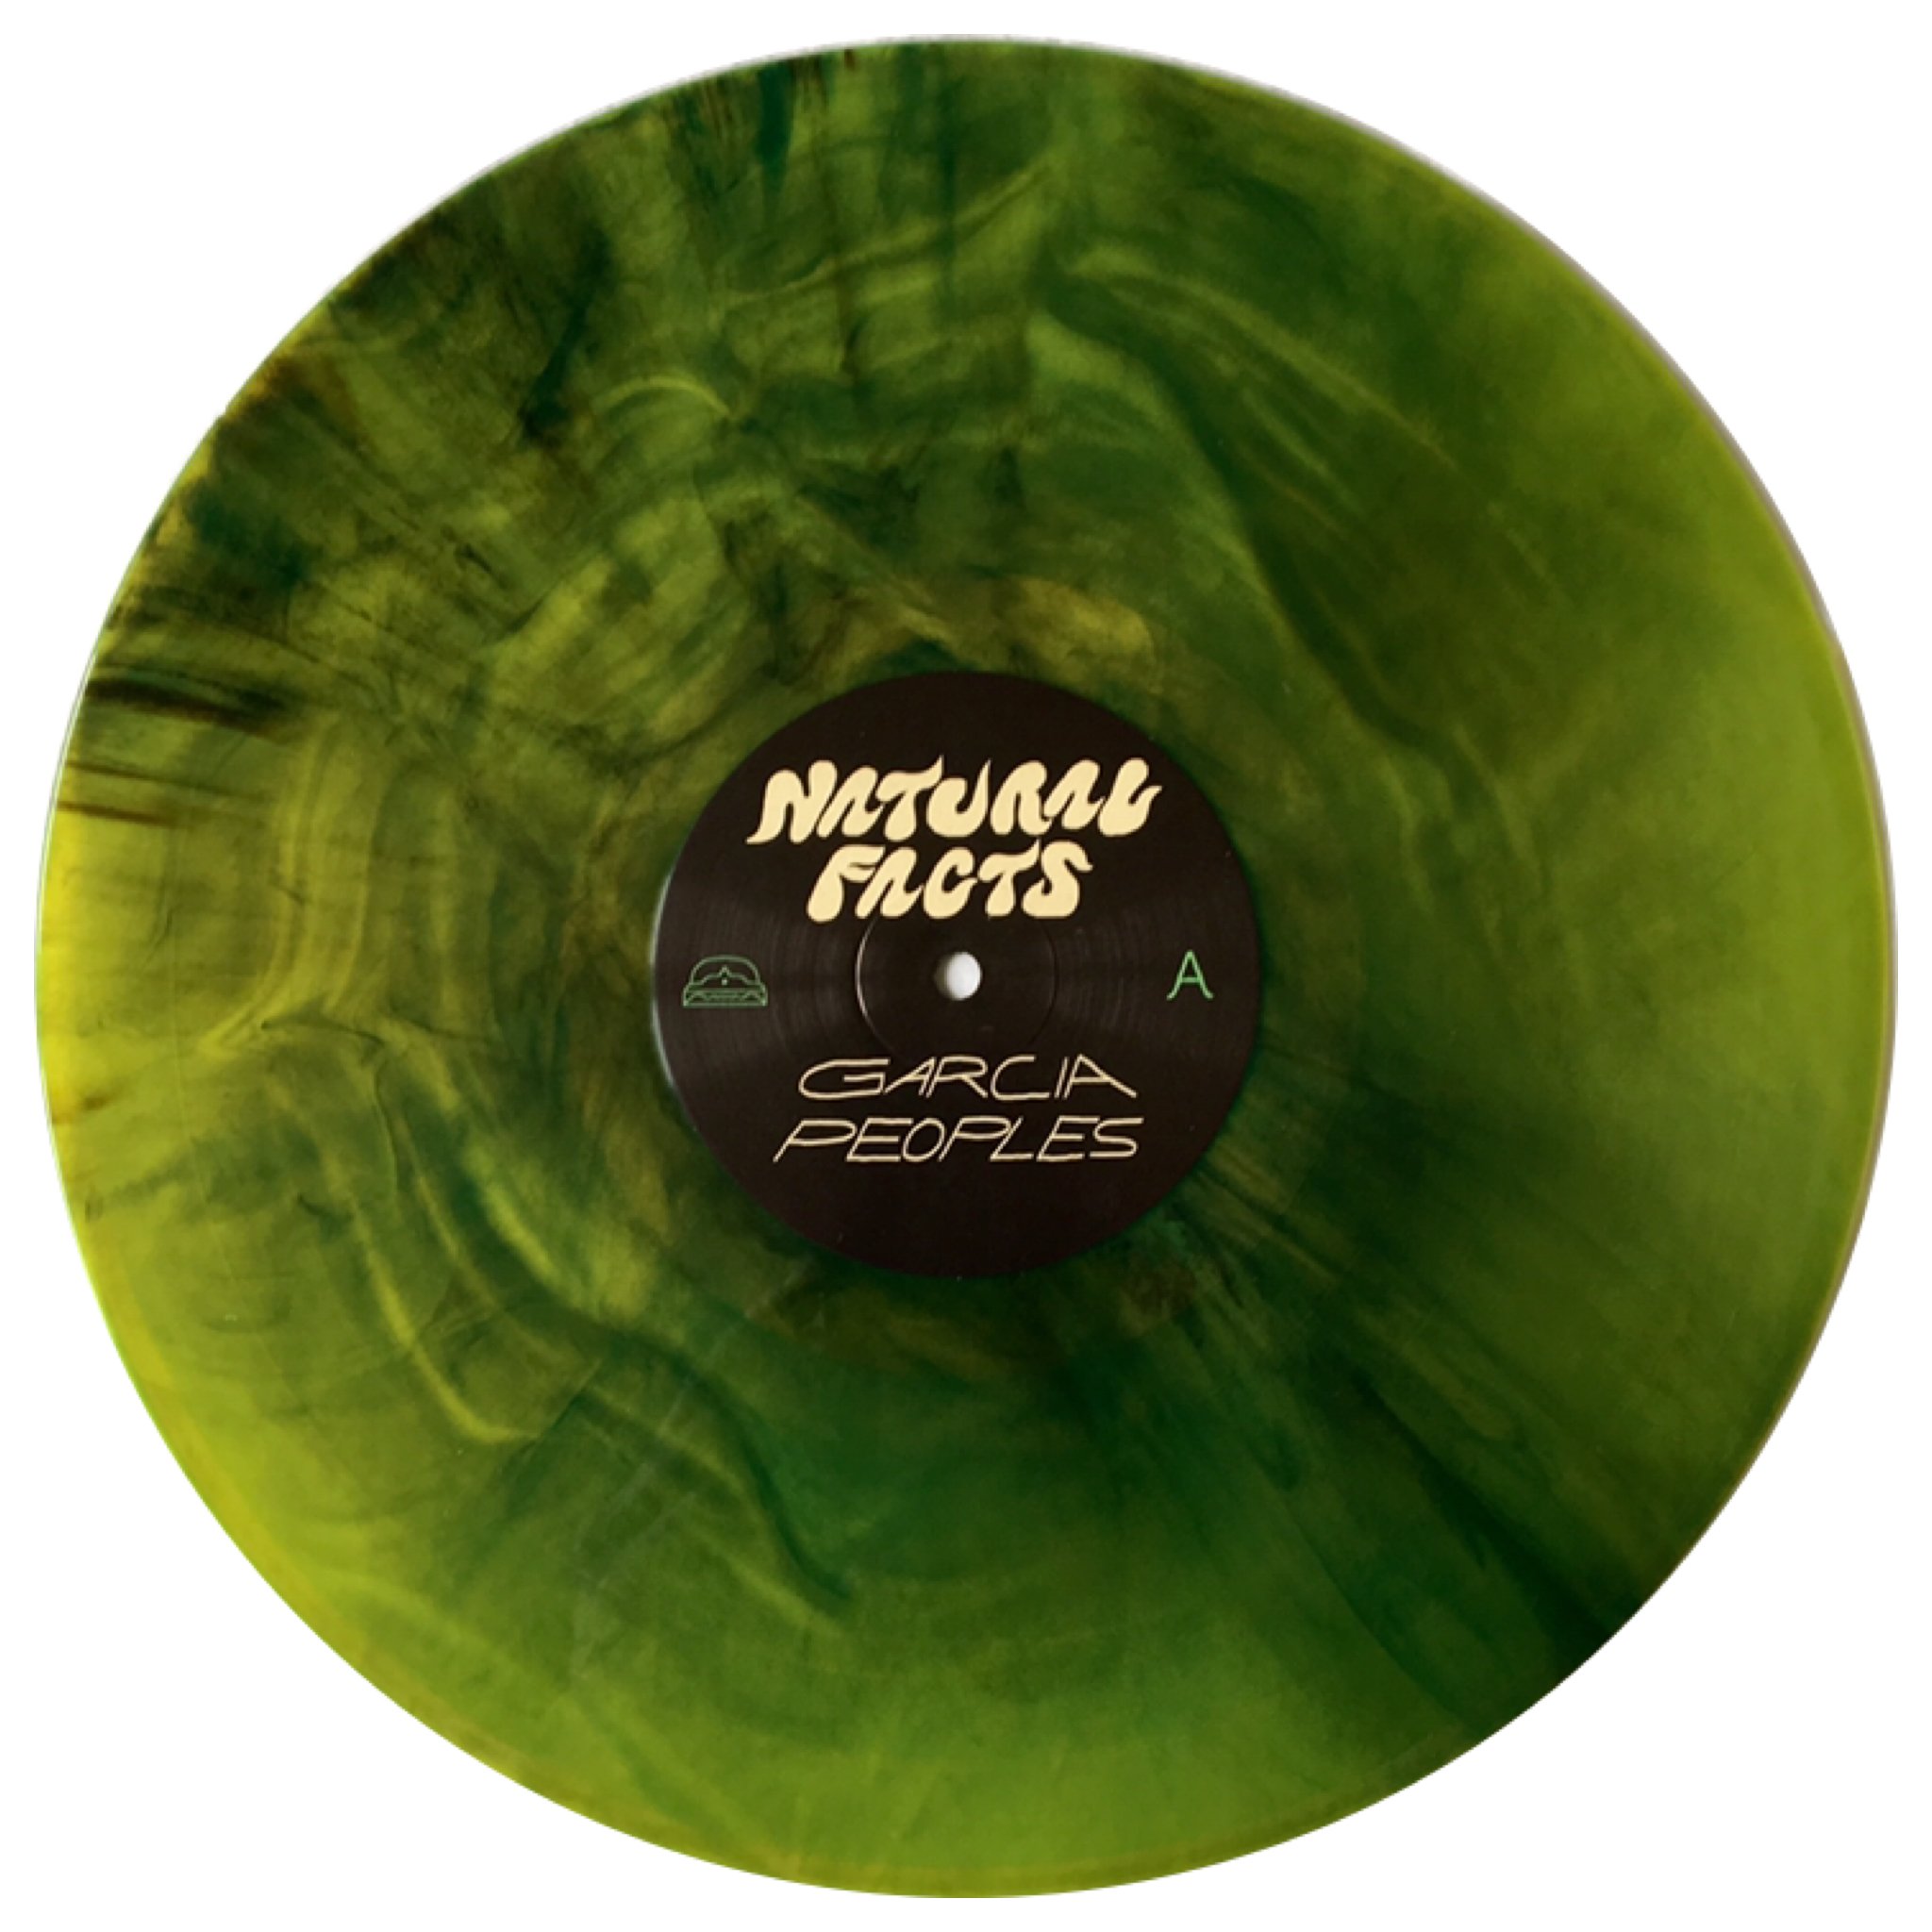 Garcia-Peopes-Natural-Facts-Beyond-Beyond-Is-Beyond-Records-chartreuse-and-black-galaxy-coloured-vinyl.jpg